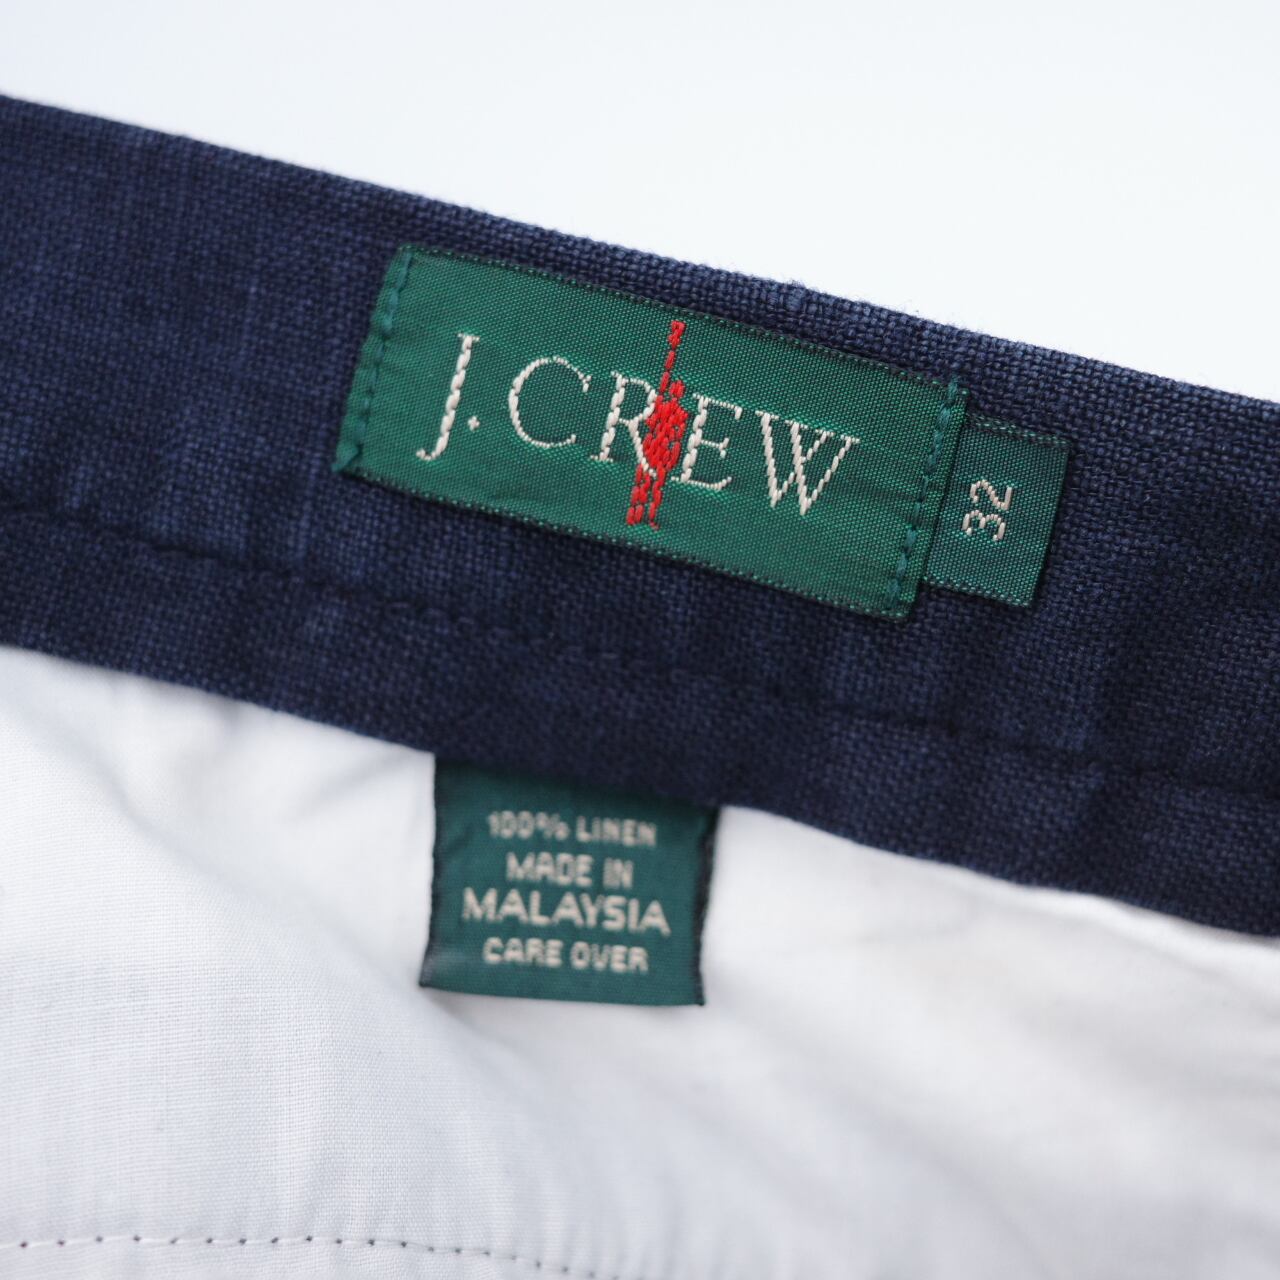 J.CREW 2tac linen trousers W32 ジェイクルー リネン スラックス 巨人タグ 80s 90s vintage